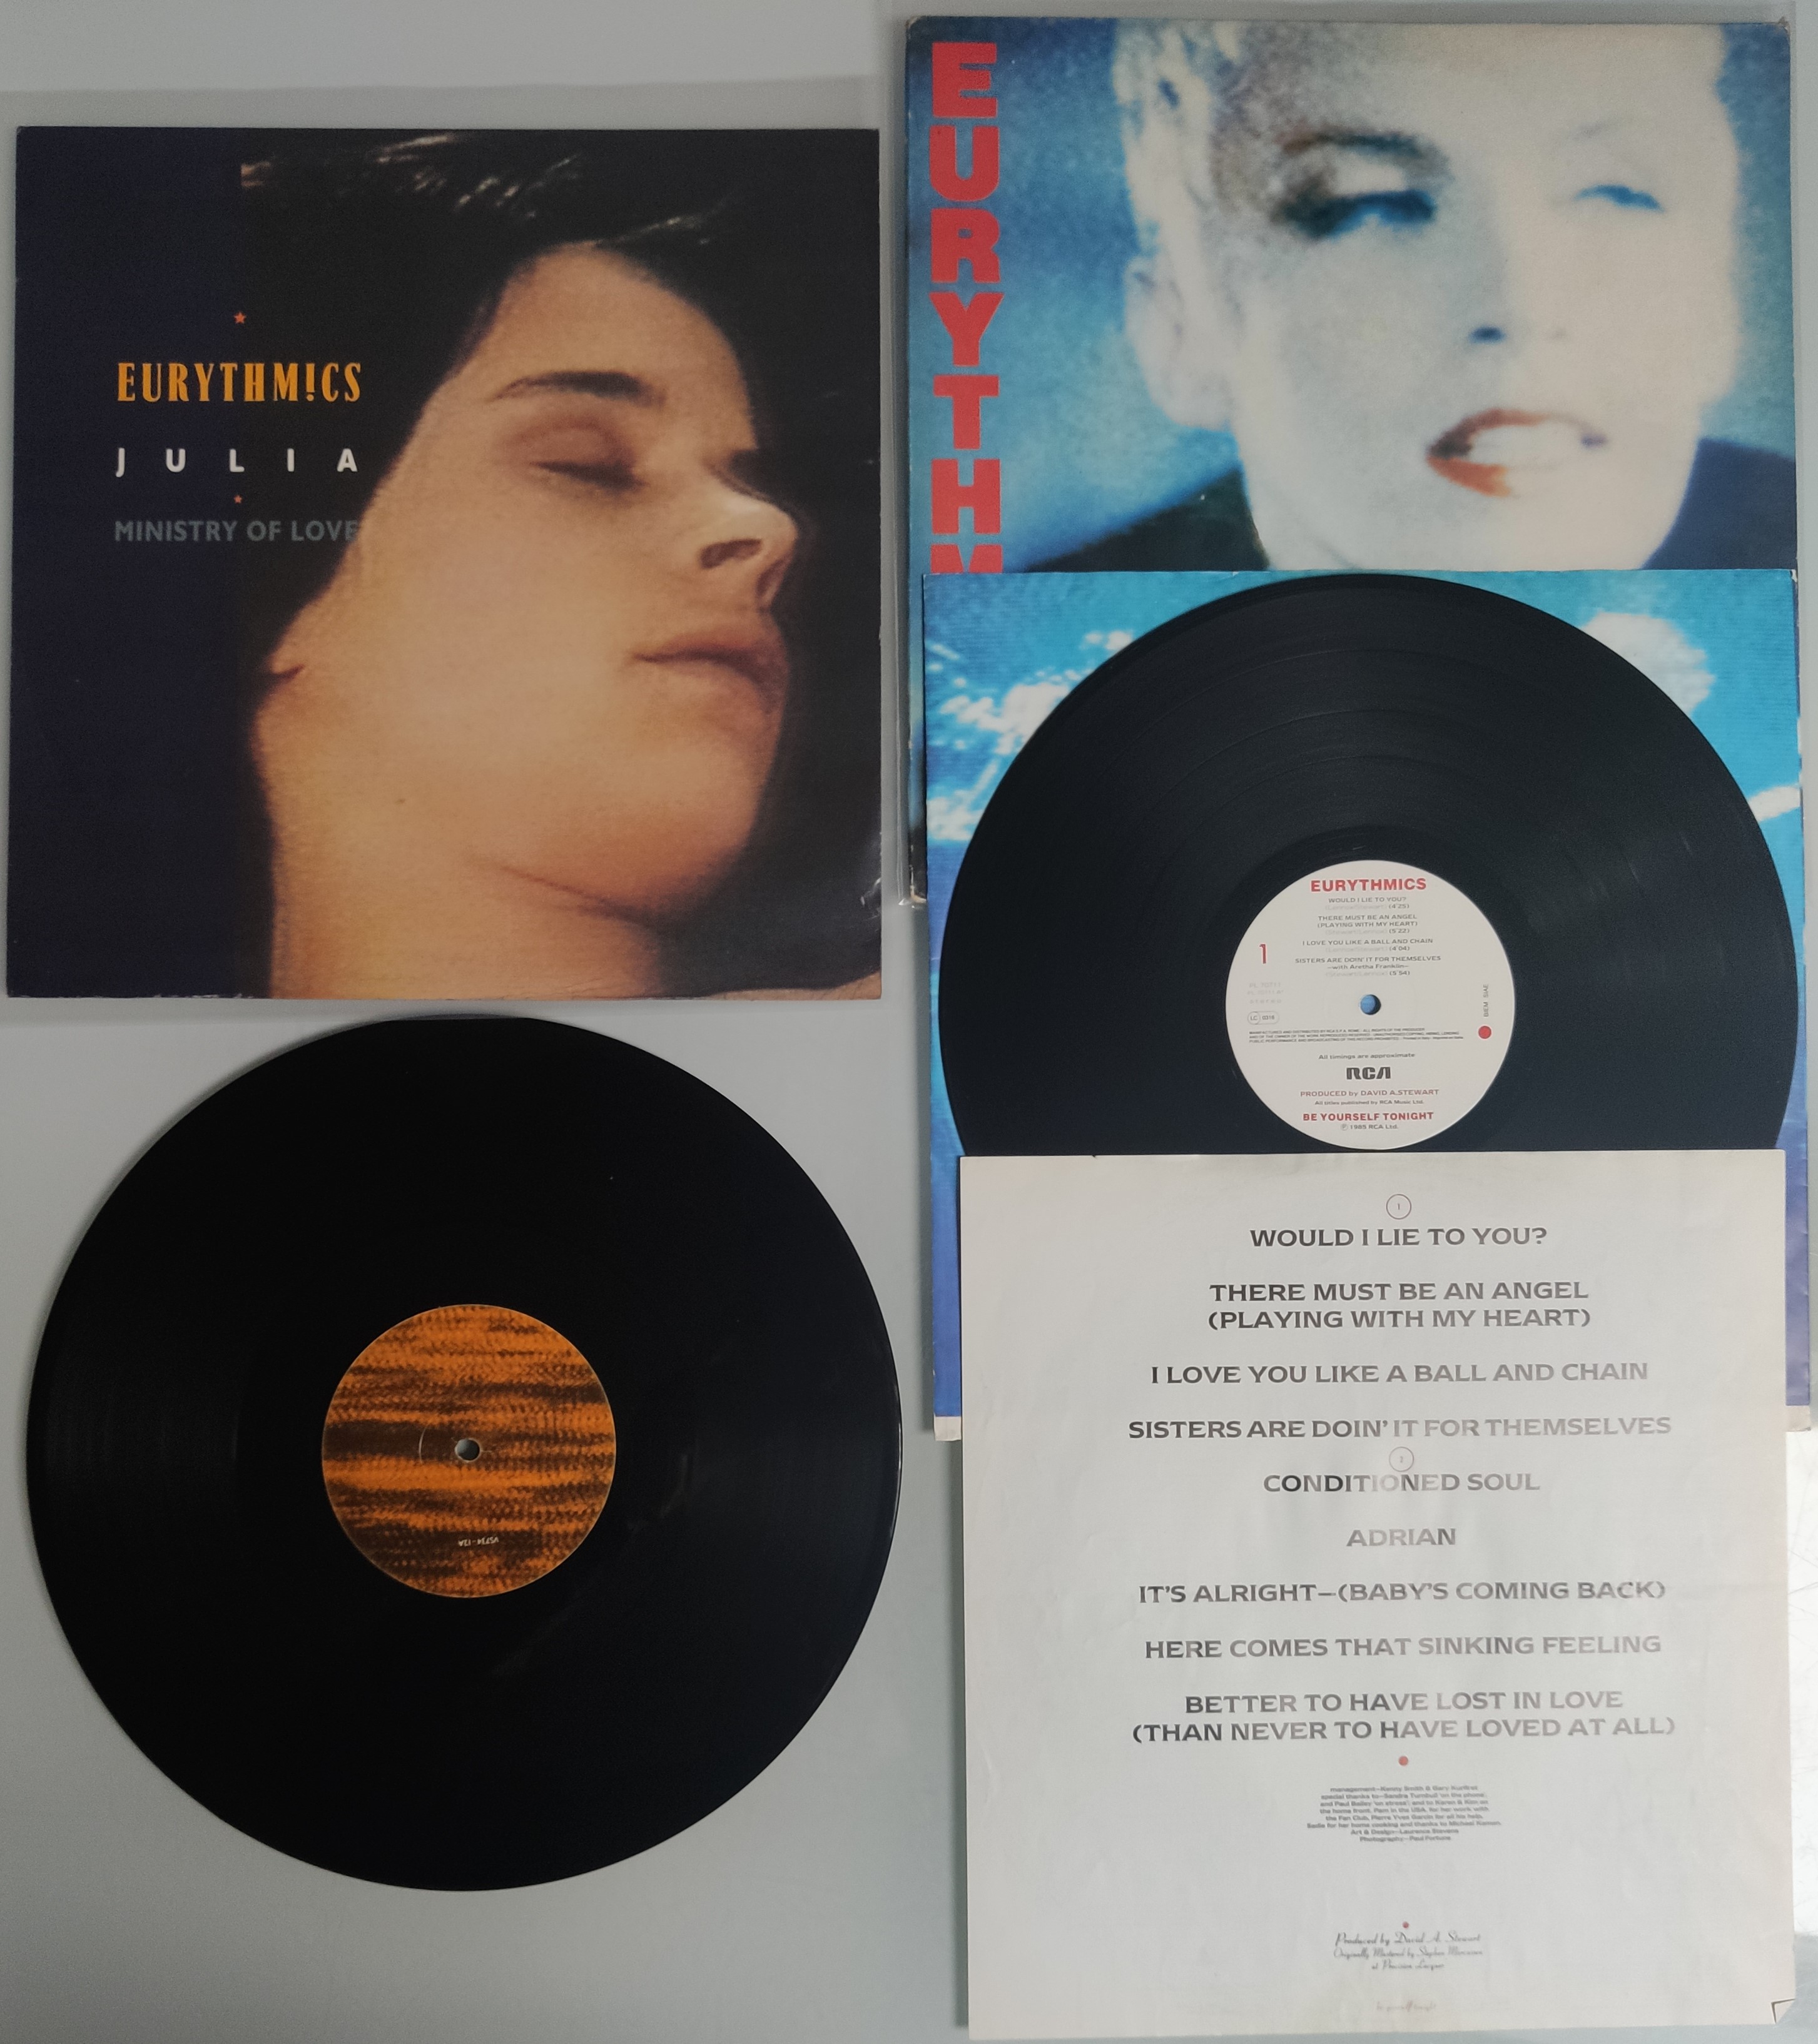 A Collection of 12 x Eurythmics / Annie Lennox New Wave Vinyl LPs and 12” Single. - Image 8 of 9